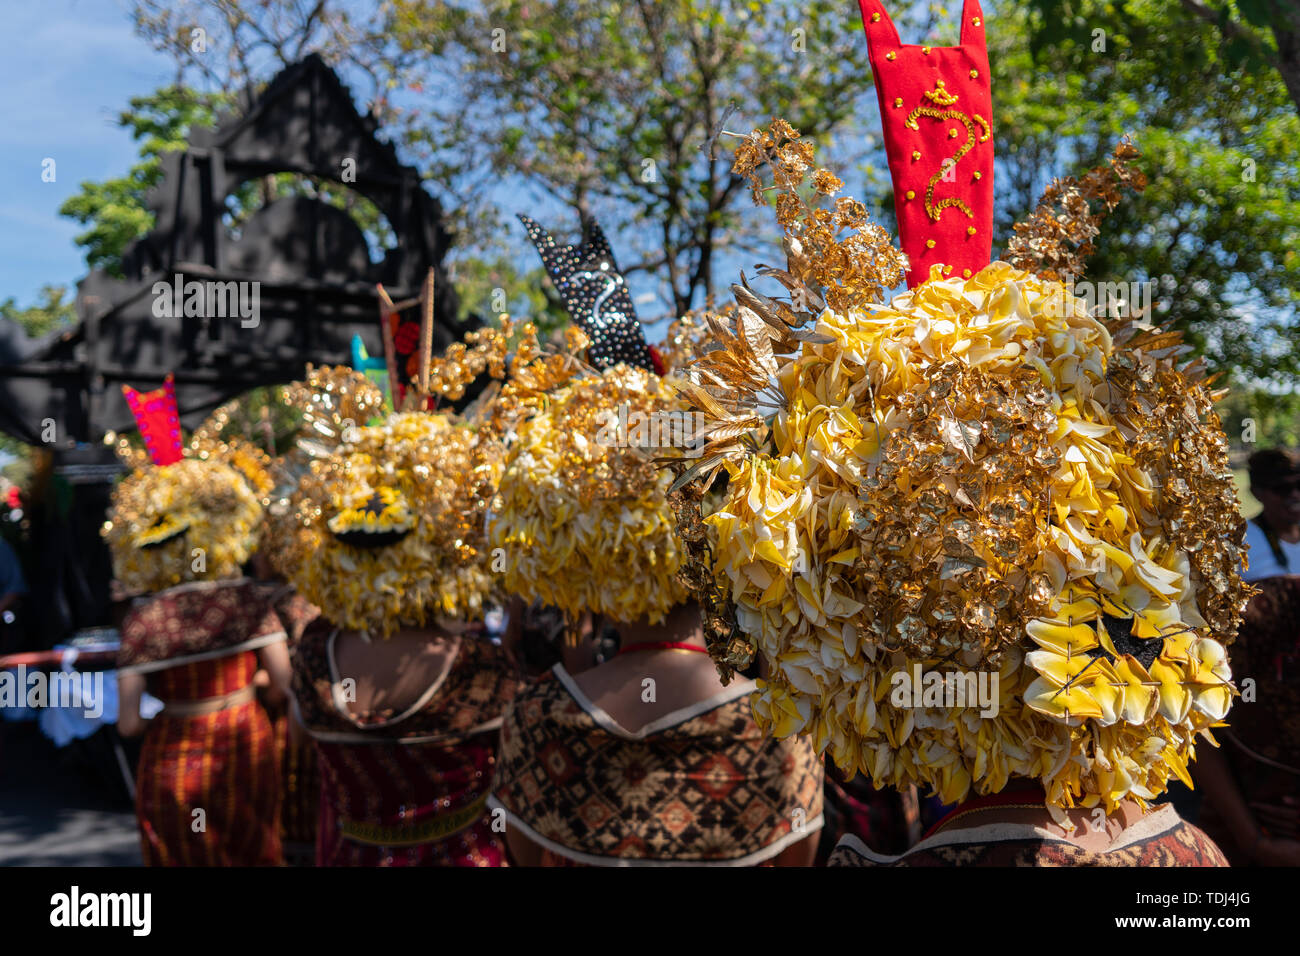 Young Balinese women wearing traditional Balinese headdress and traditional sarong at the opening ceremony of the Bali Art Festival 2019. This is free Stock Photo